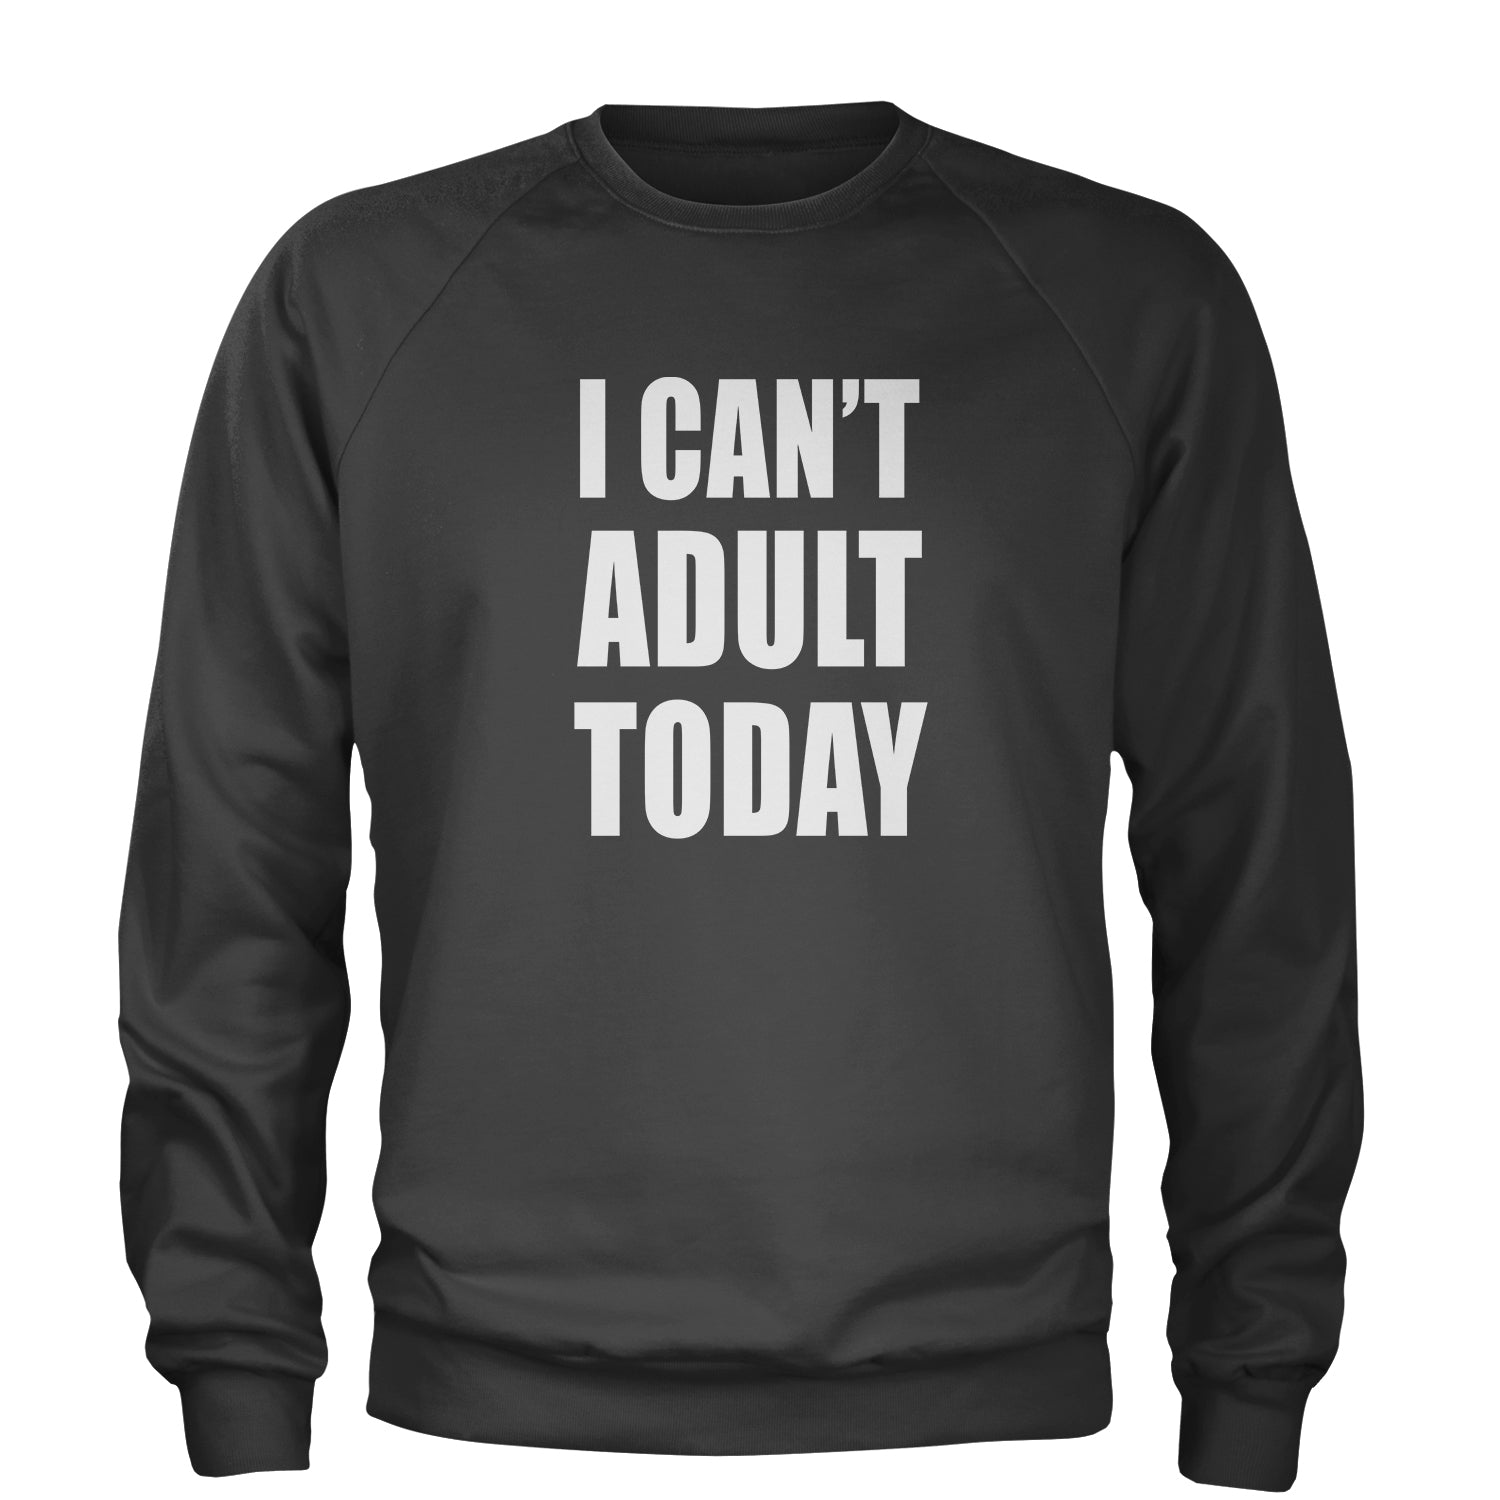 I Can't Adult Today Adult Crewneck Sweatshirt adult, cant, I, today by Expression Tees